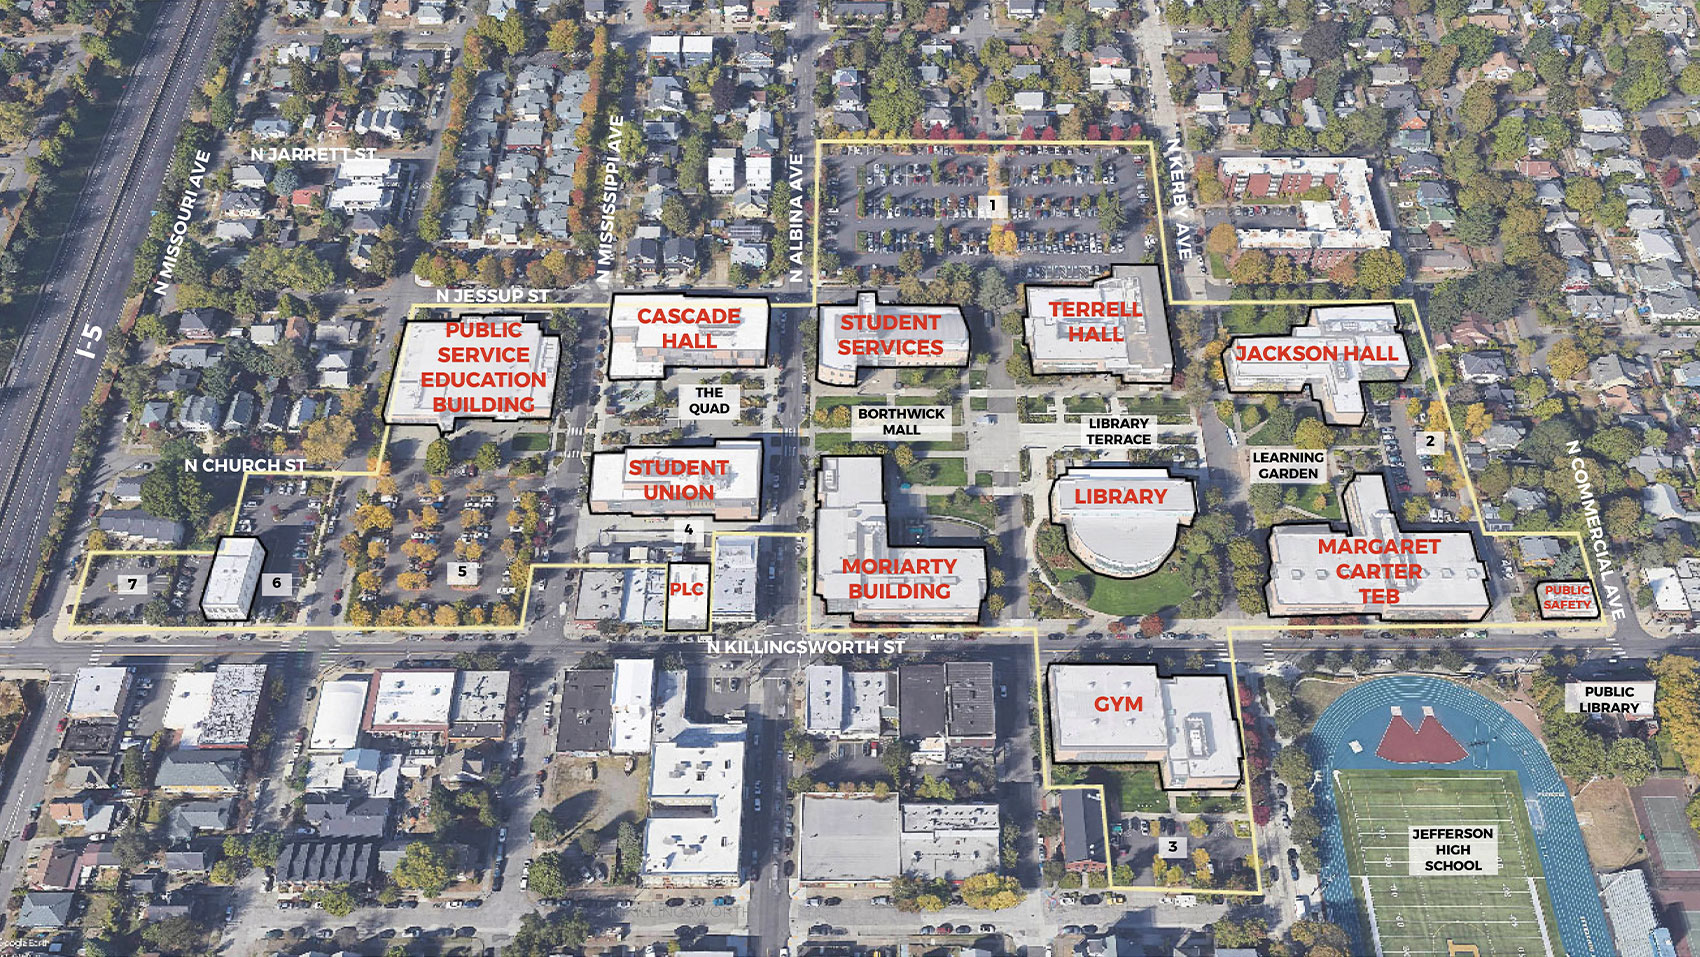 Existing Cascade Campus|An aerial photograph view looking down at the Cascade Campus from a southern angle, showing a few blocks of the surrounding streets and neighborhoods. I-5 is visible at the left where Killingsworth Street crosses the freeway. A yellow line indicates the boundary of the existing campus. The campus buildings are outlined in black and labeled in red, and campus open spaces are labeled: The Quad, Borthwick Mall, Library Terrace, and Learning Garden. Outside the campus, in the bottom right of the image, Jefferson High School and the North Portland Library are labeled. 